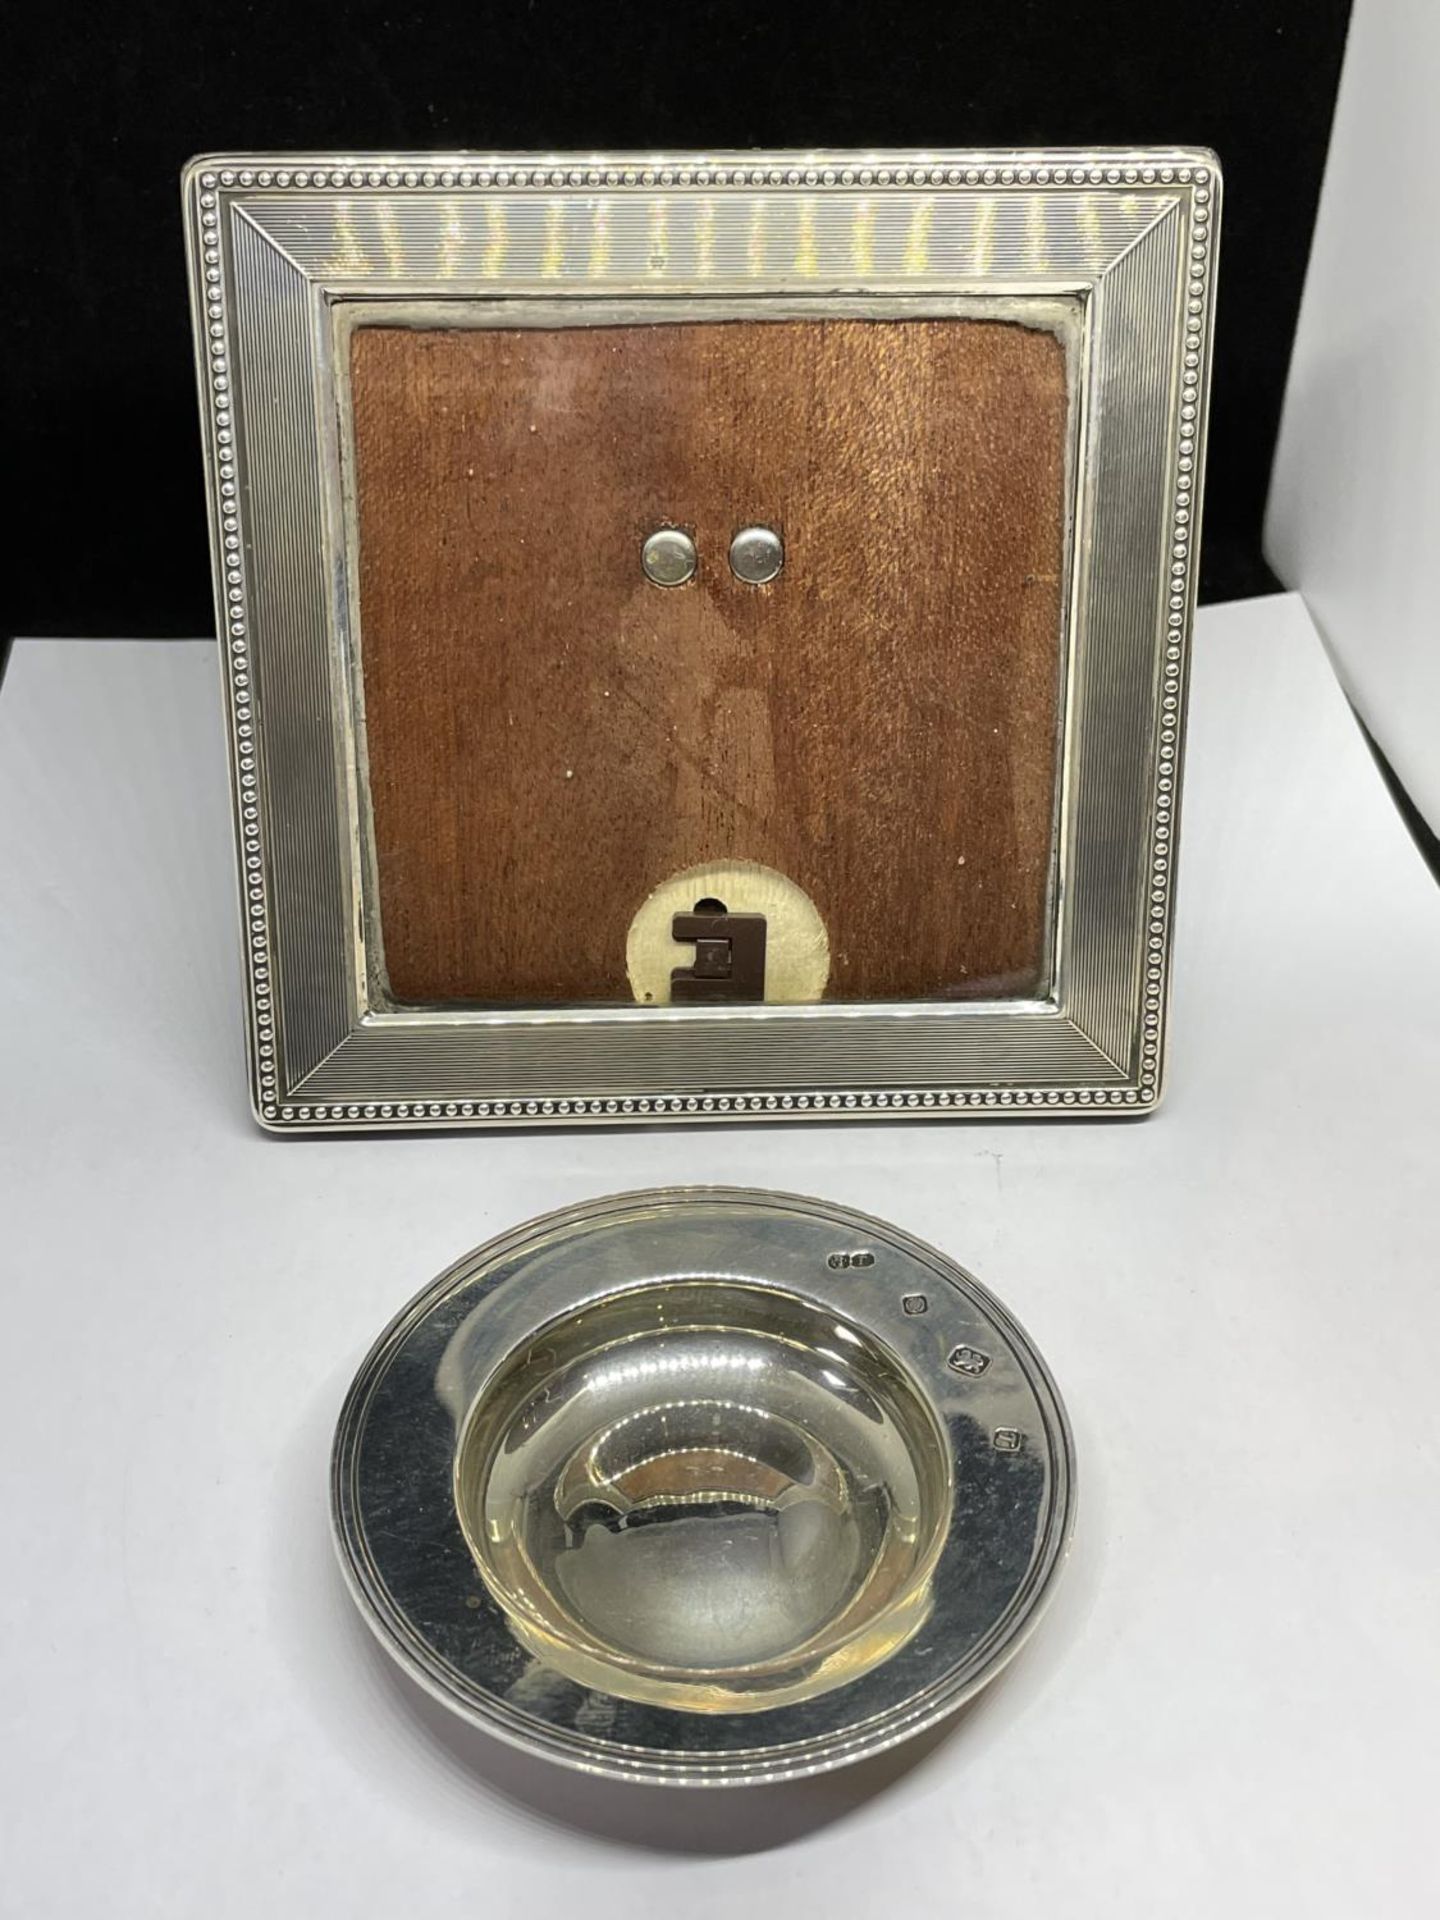 A HALLMARKED SHEFFIELD PIN DISH GROSS WEIGHT 40.5 GRAMS AND A MARKED 925 SILVER PHOTOGRAPH FRAME